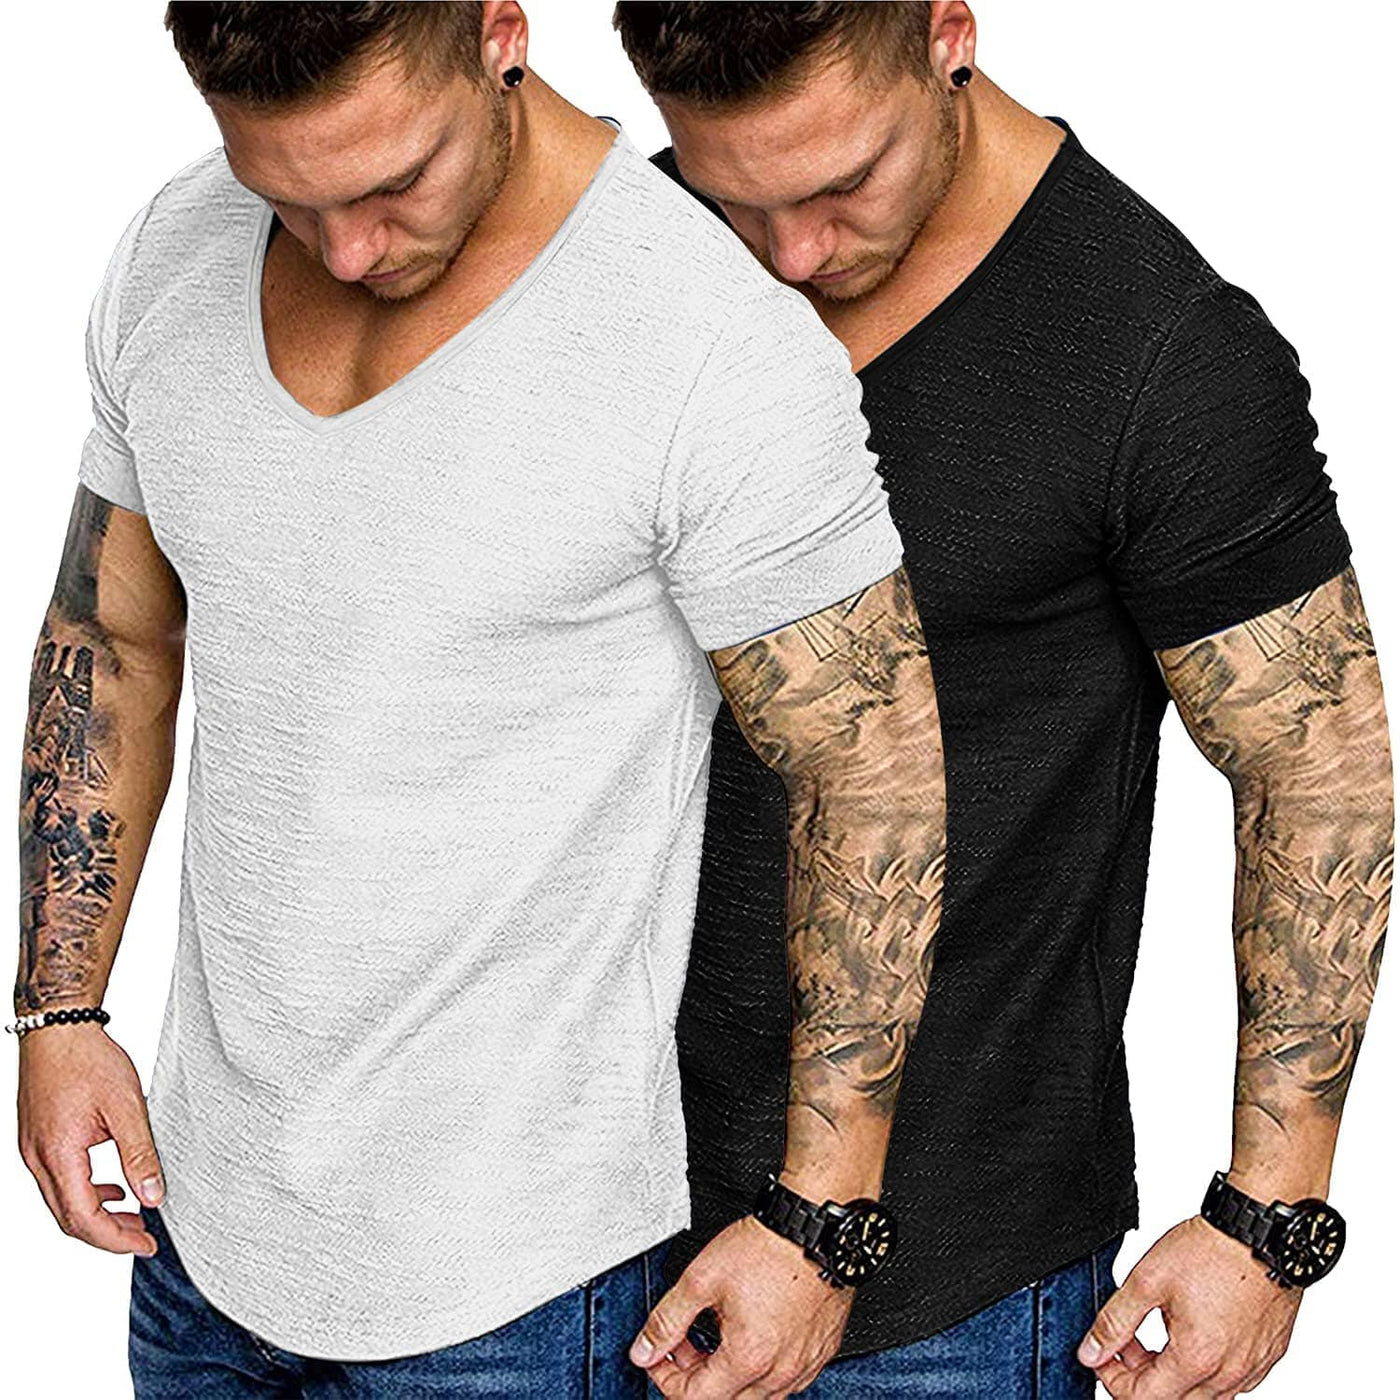 Coofandy 2 Pack Muscle T Shirt (US Only) T-Shirt coofandy Black/ White S 